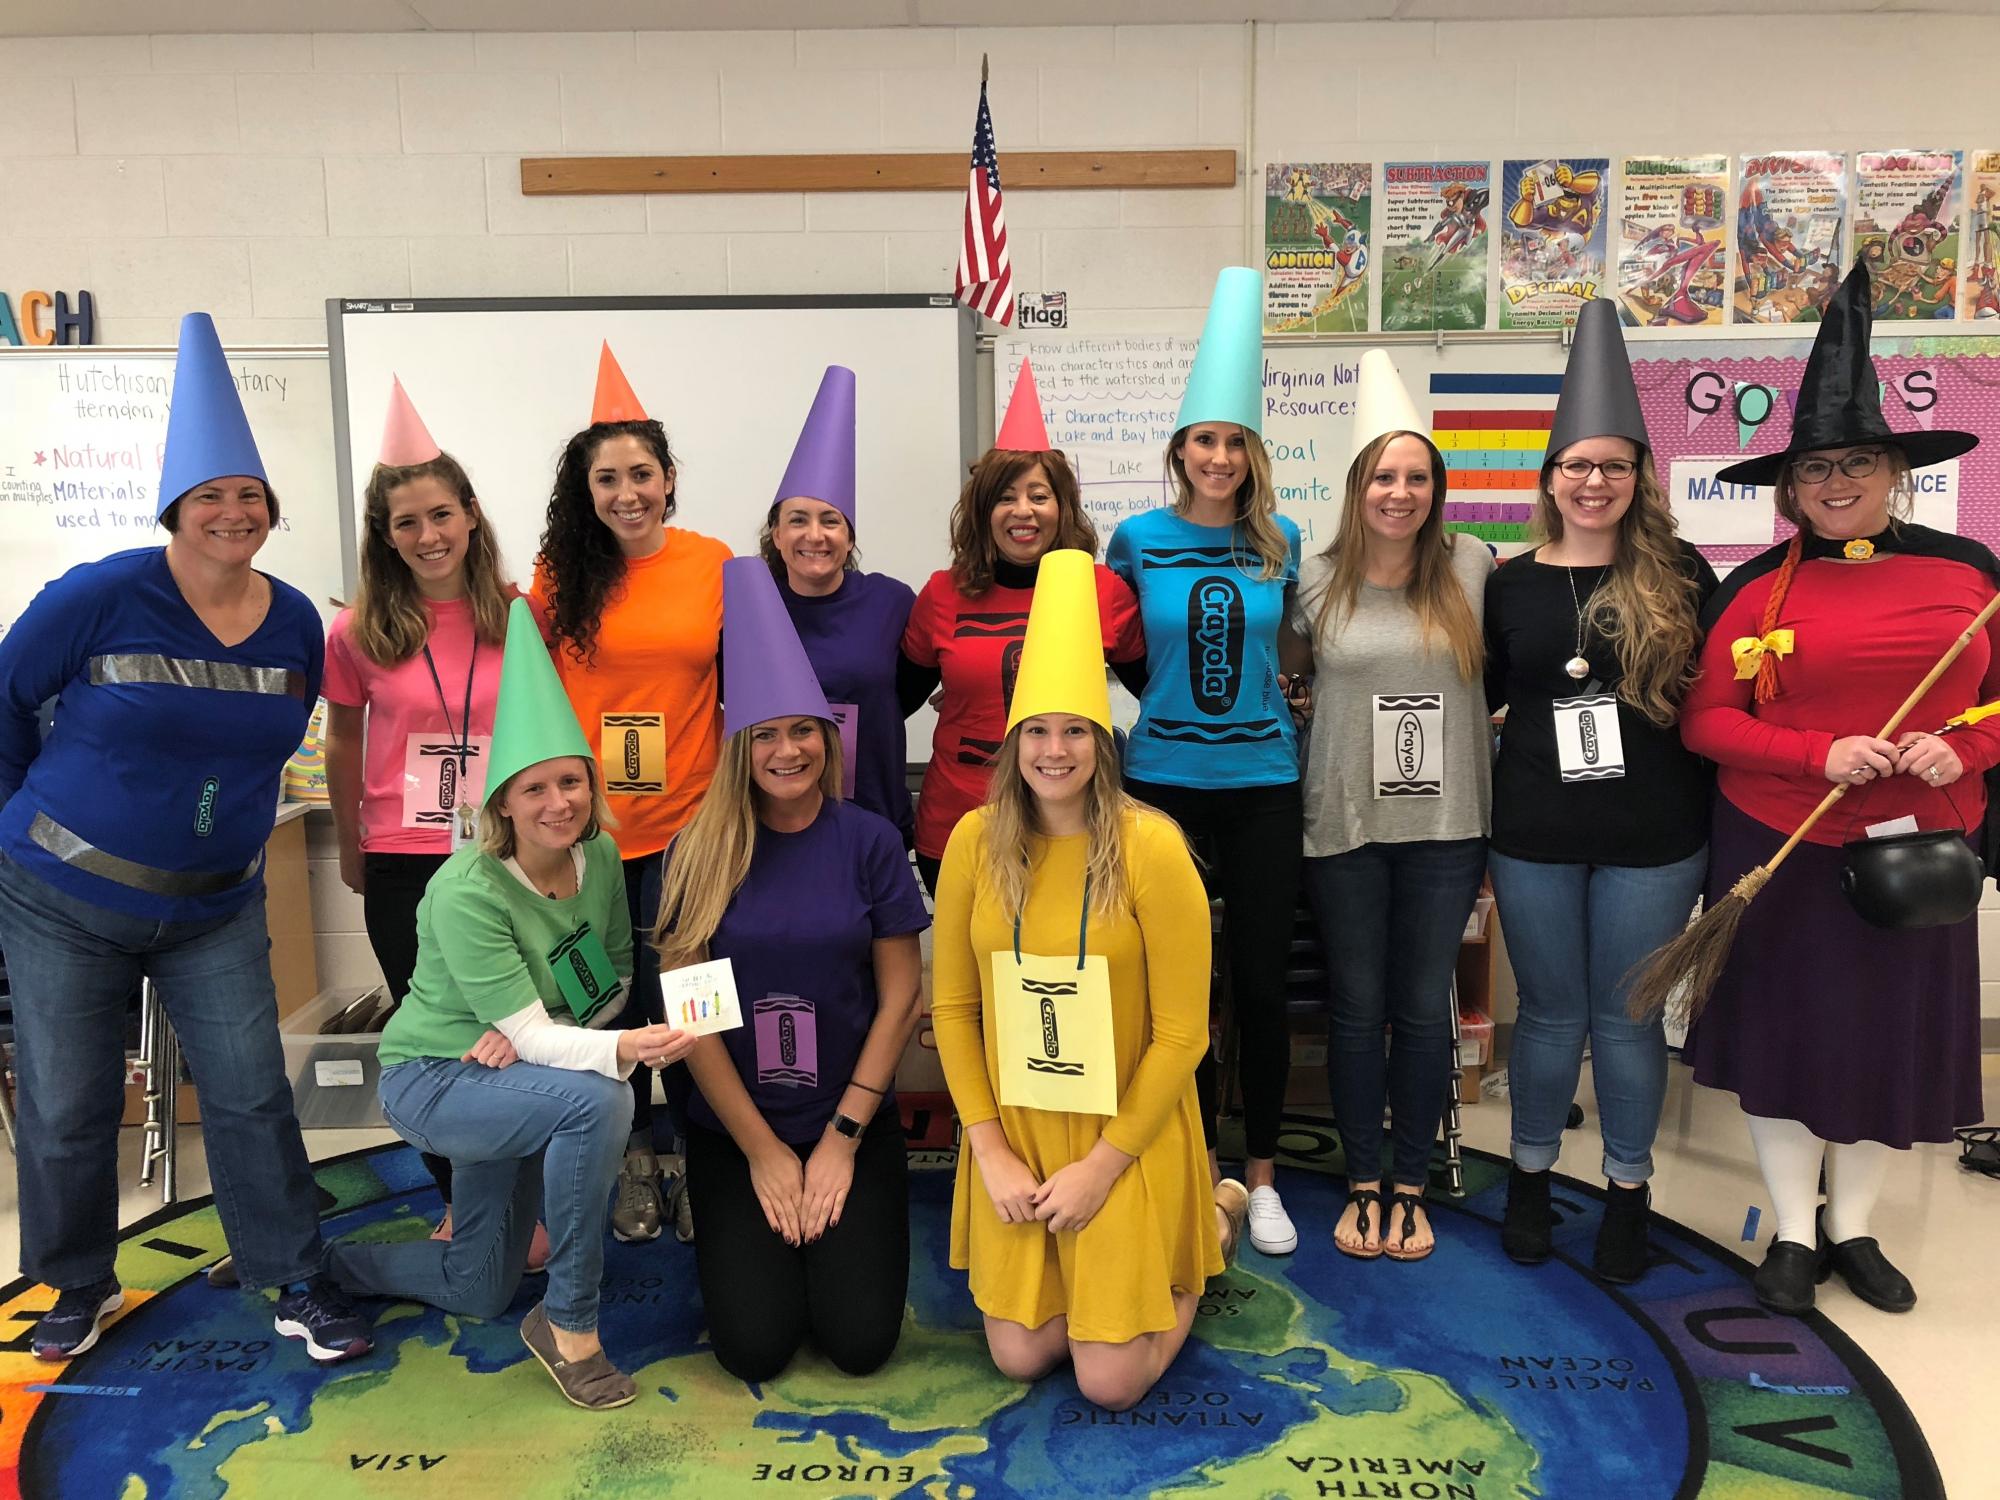 Book Character Day at Hutchison | Hutchison Elementary School